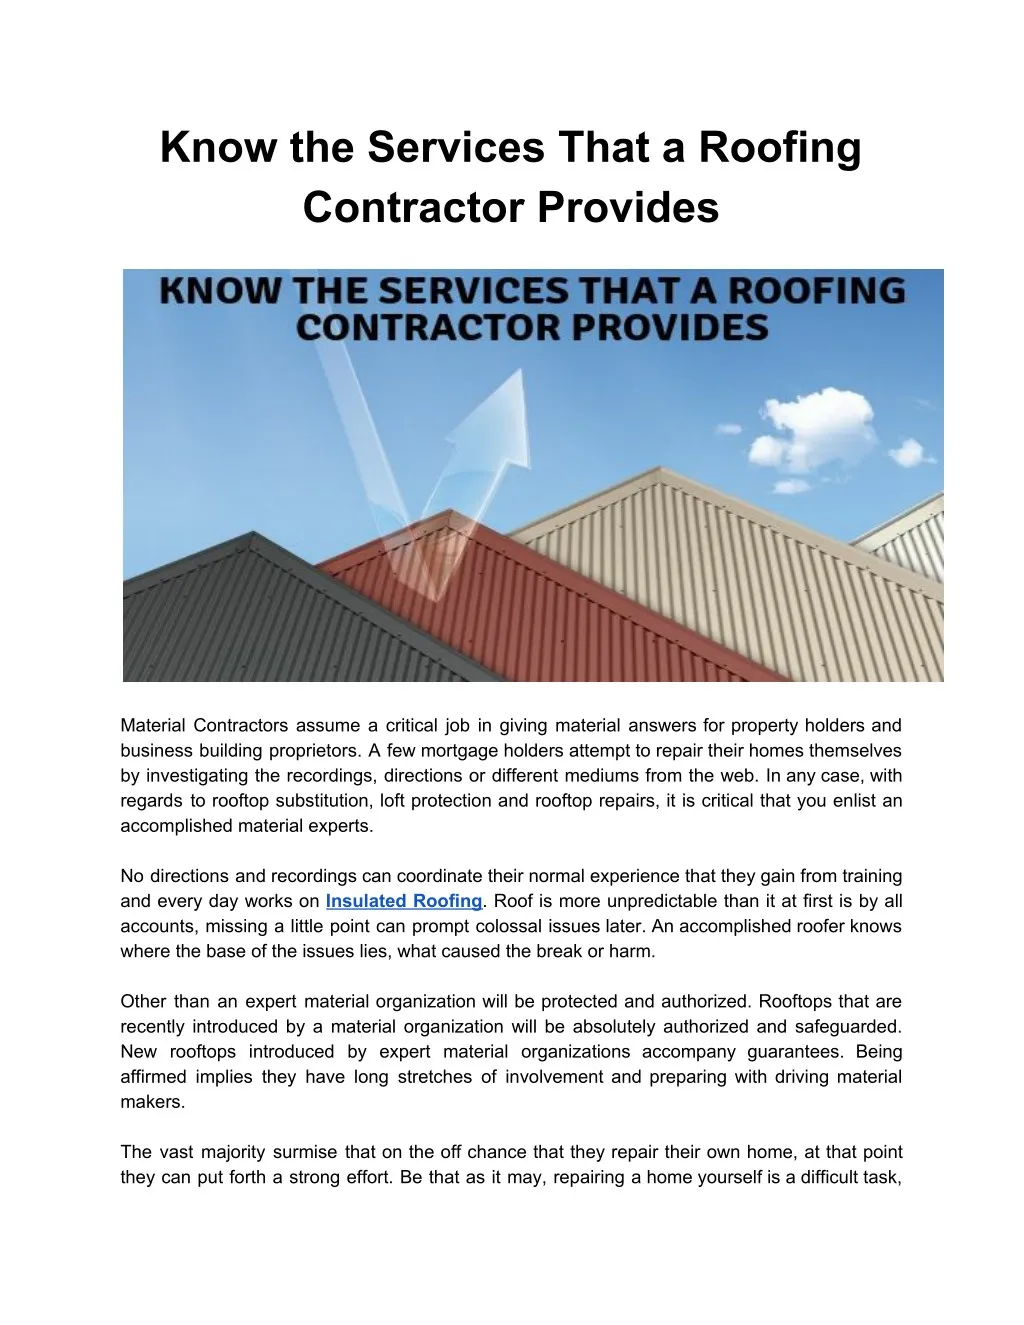 know the services that a roofing contractor